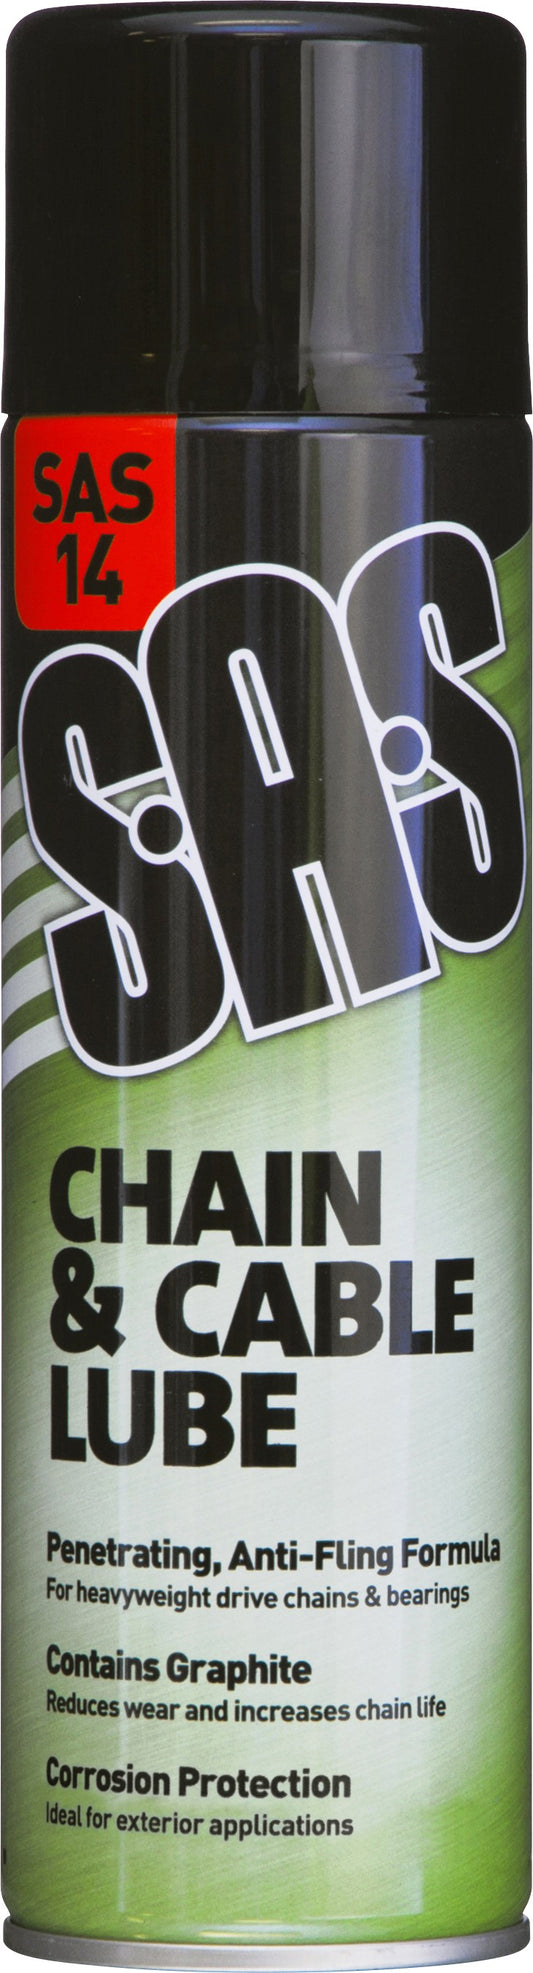 S.A.S Chain & Cable Lube 500ml